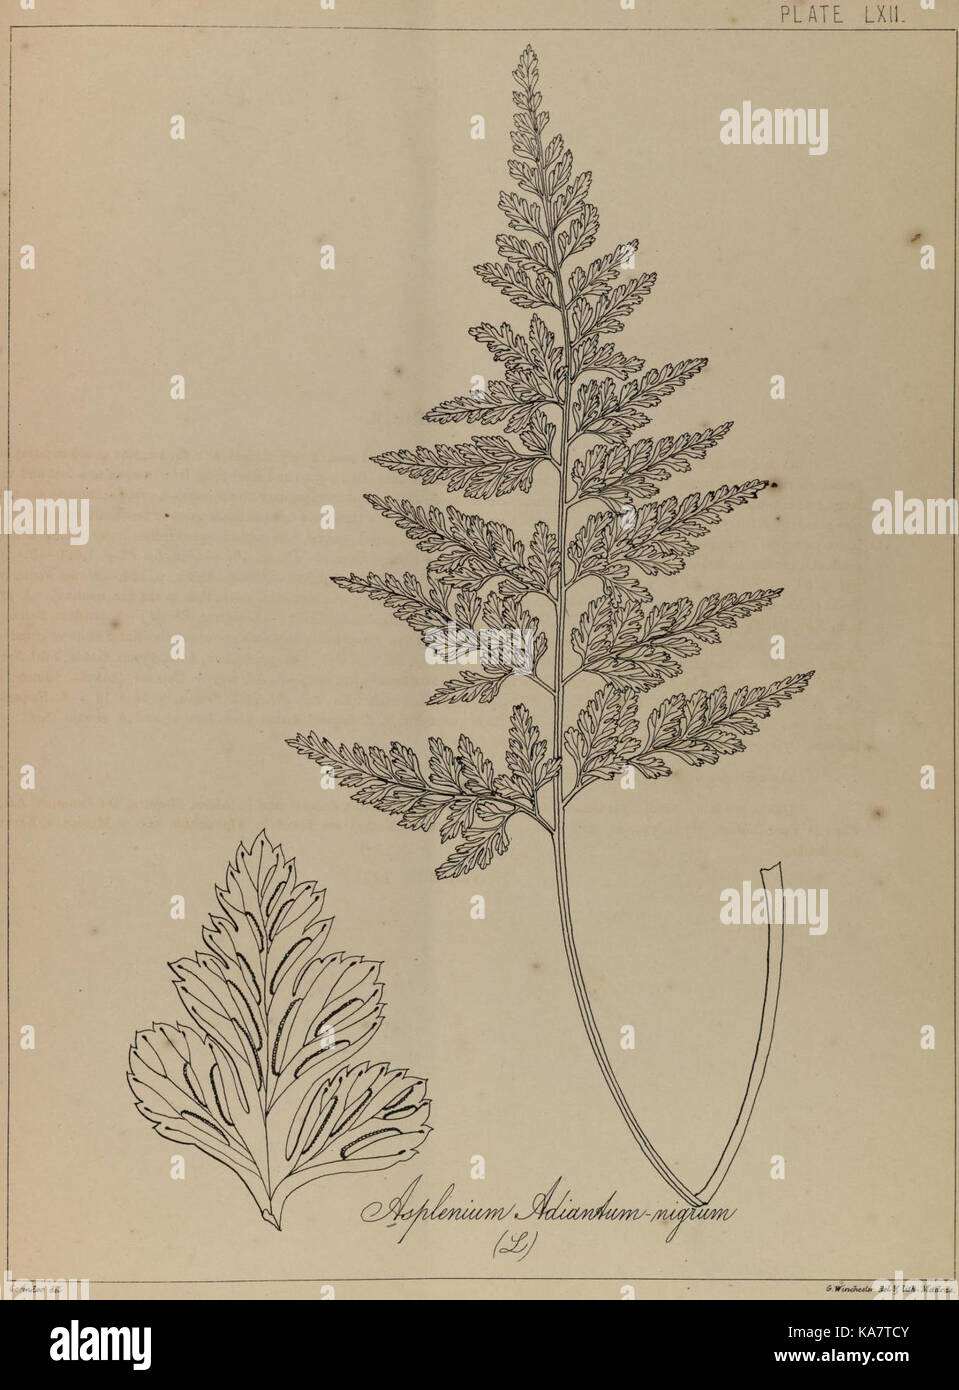 The ferns of British India (PLATE LXII) (8530294115) Stock Photo